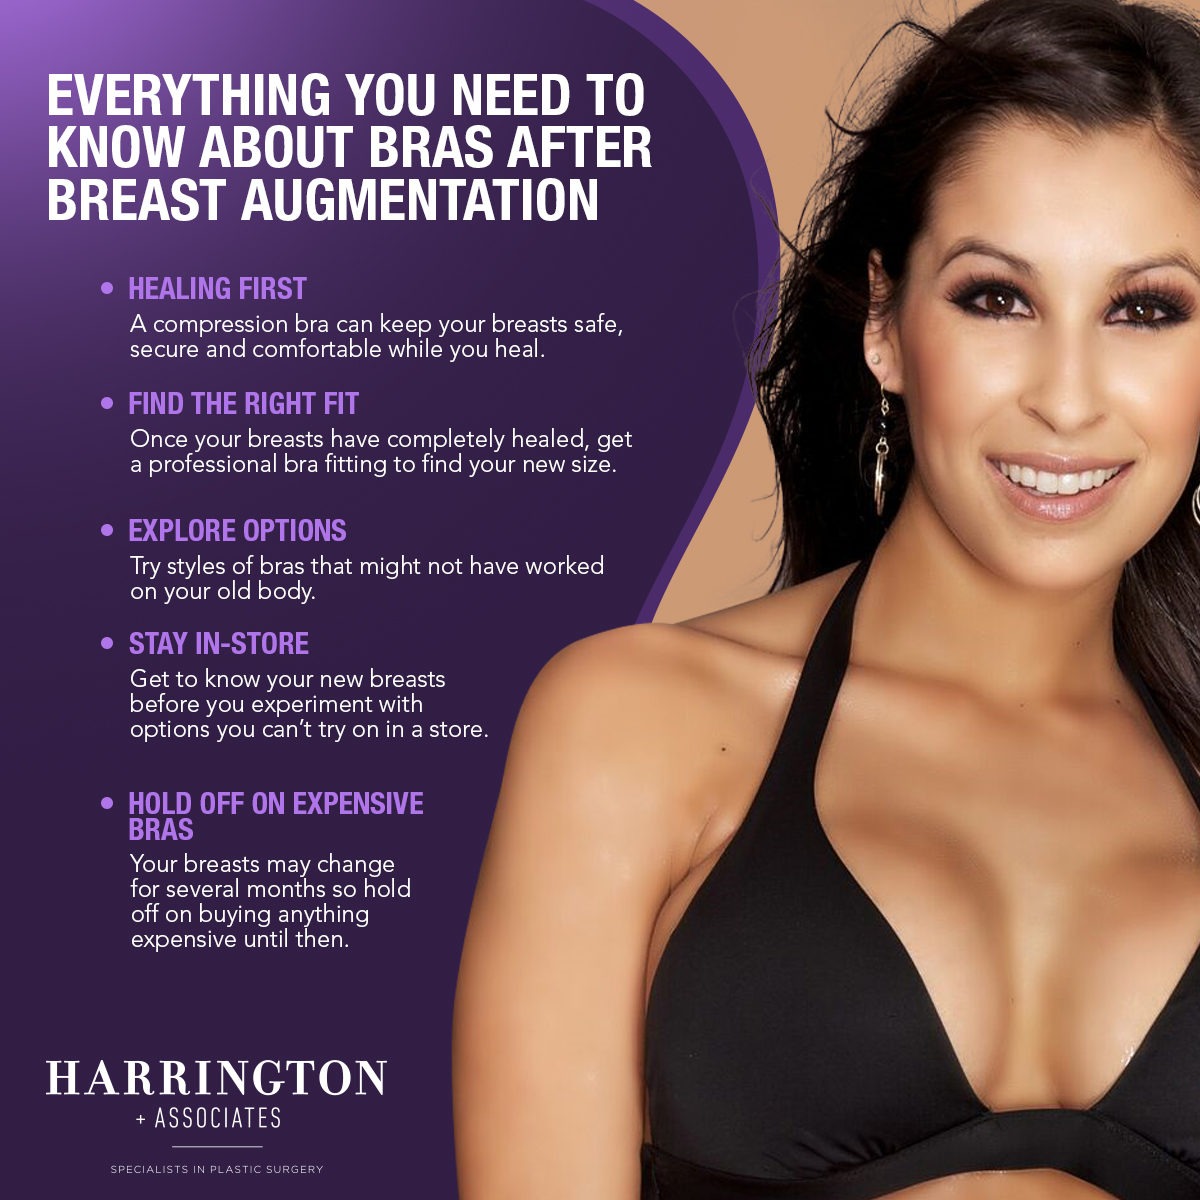 Everything You Need To Know About Bras After Breast Augmentation